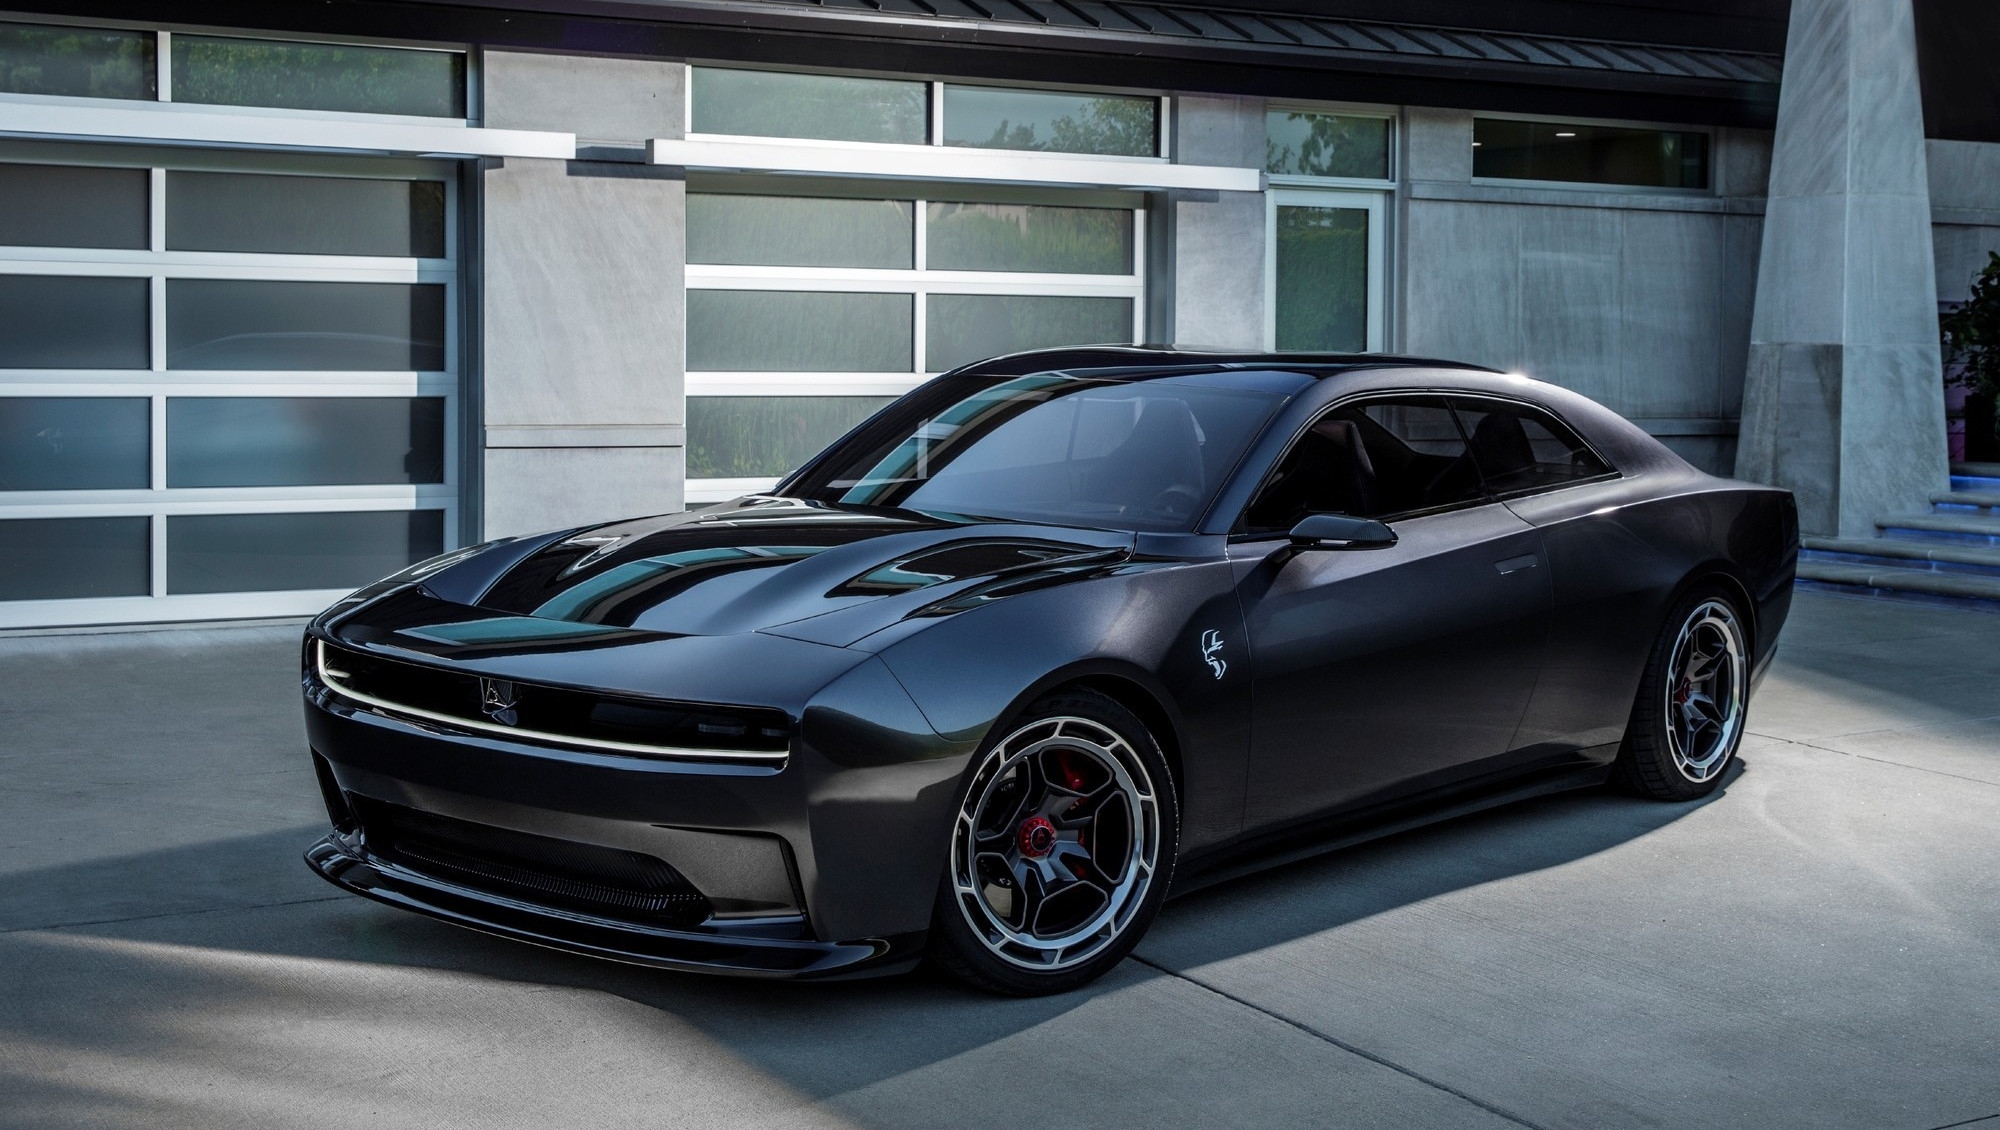 Dodge Charger Daytona SRT: a concept electric muscle car with two electric motors with more than 700 hp and a range of 800 km